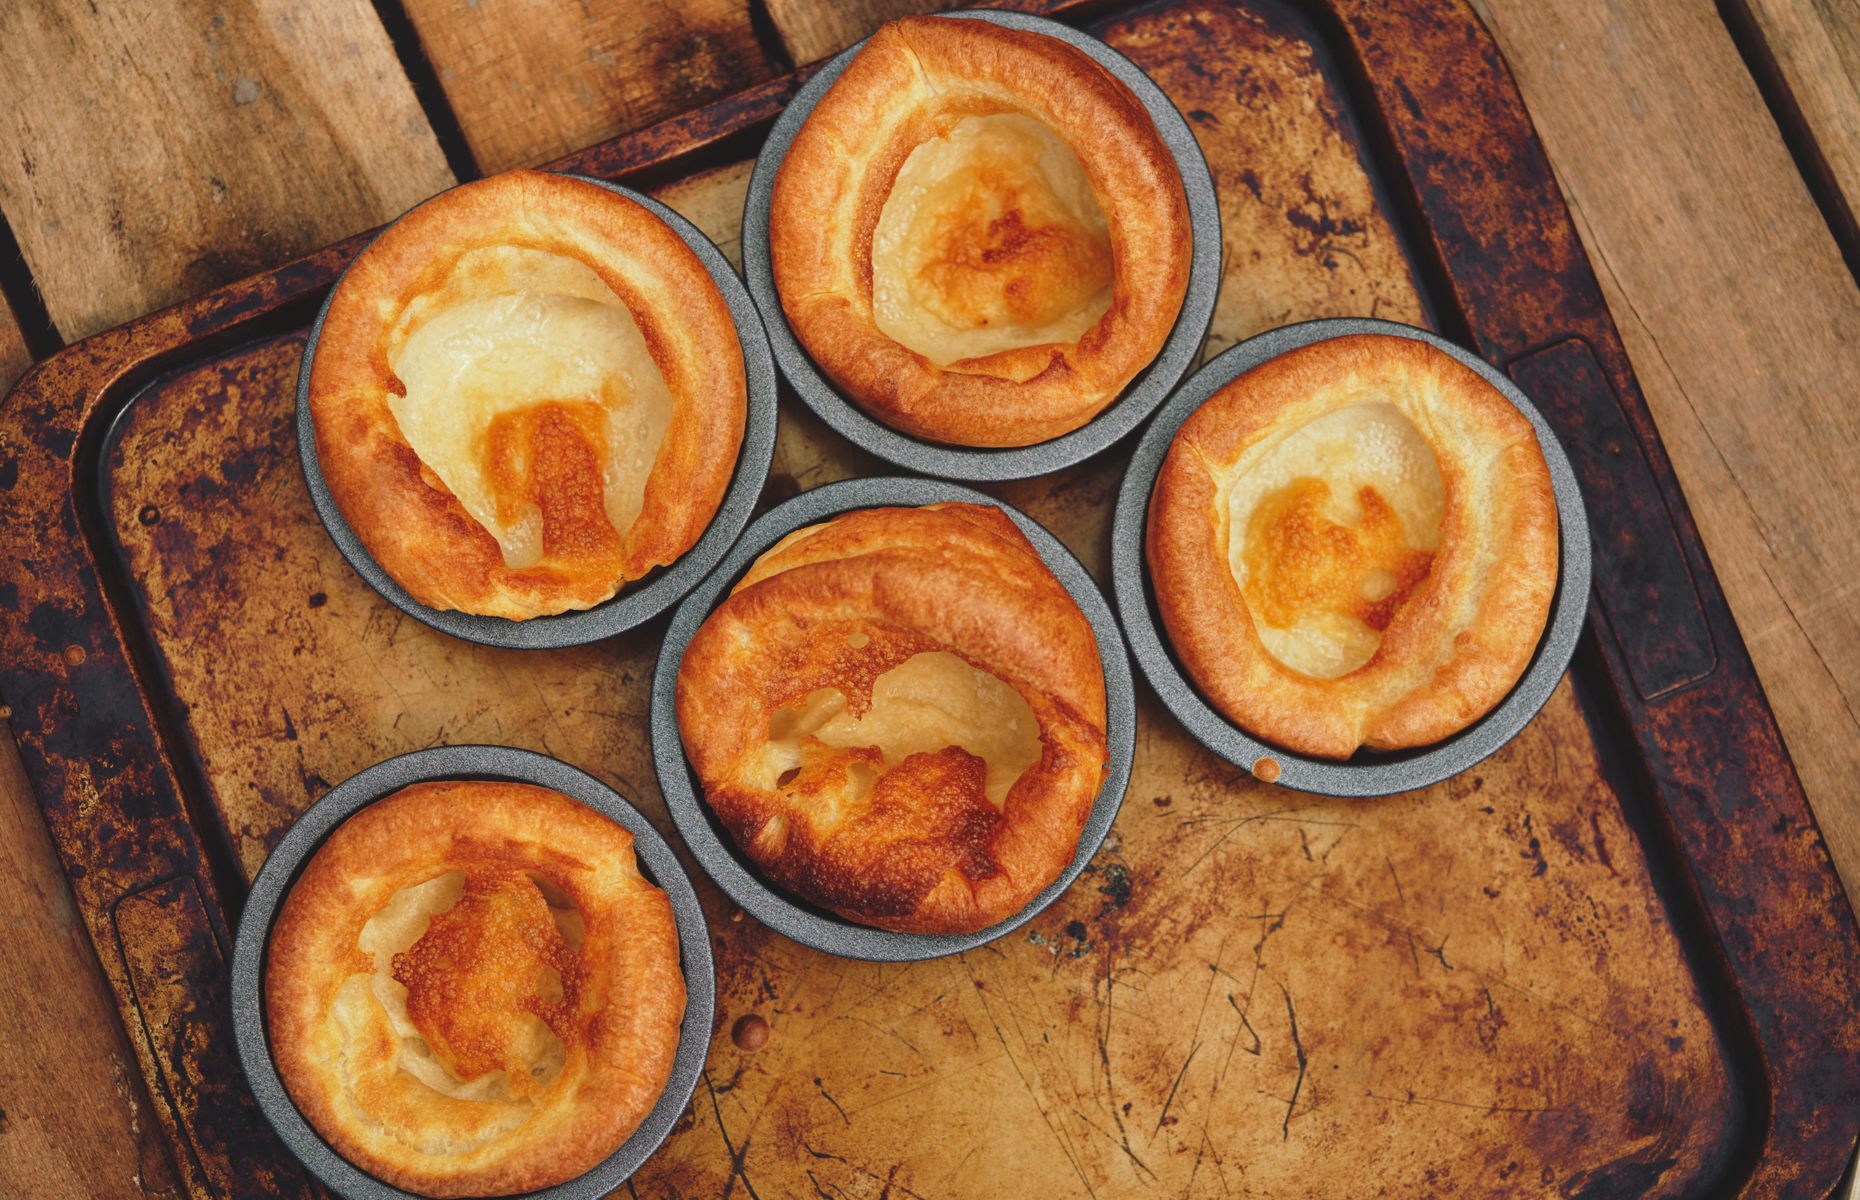 Traditional Yorkshire puddings (Image: Duncan Andison/Shutterstock)